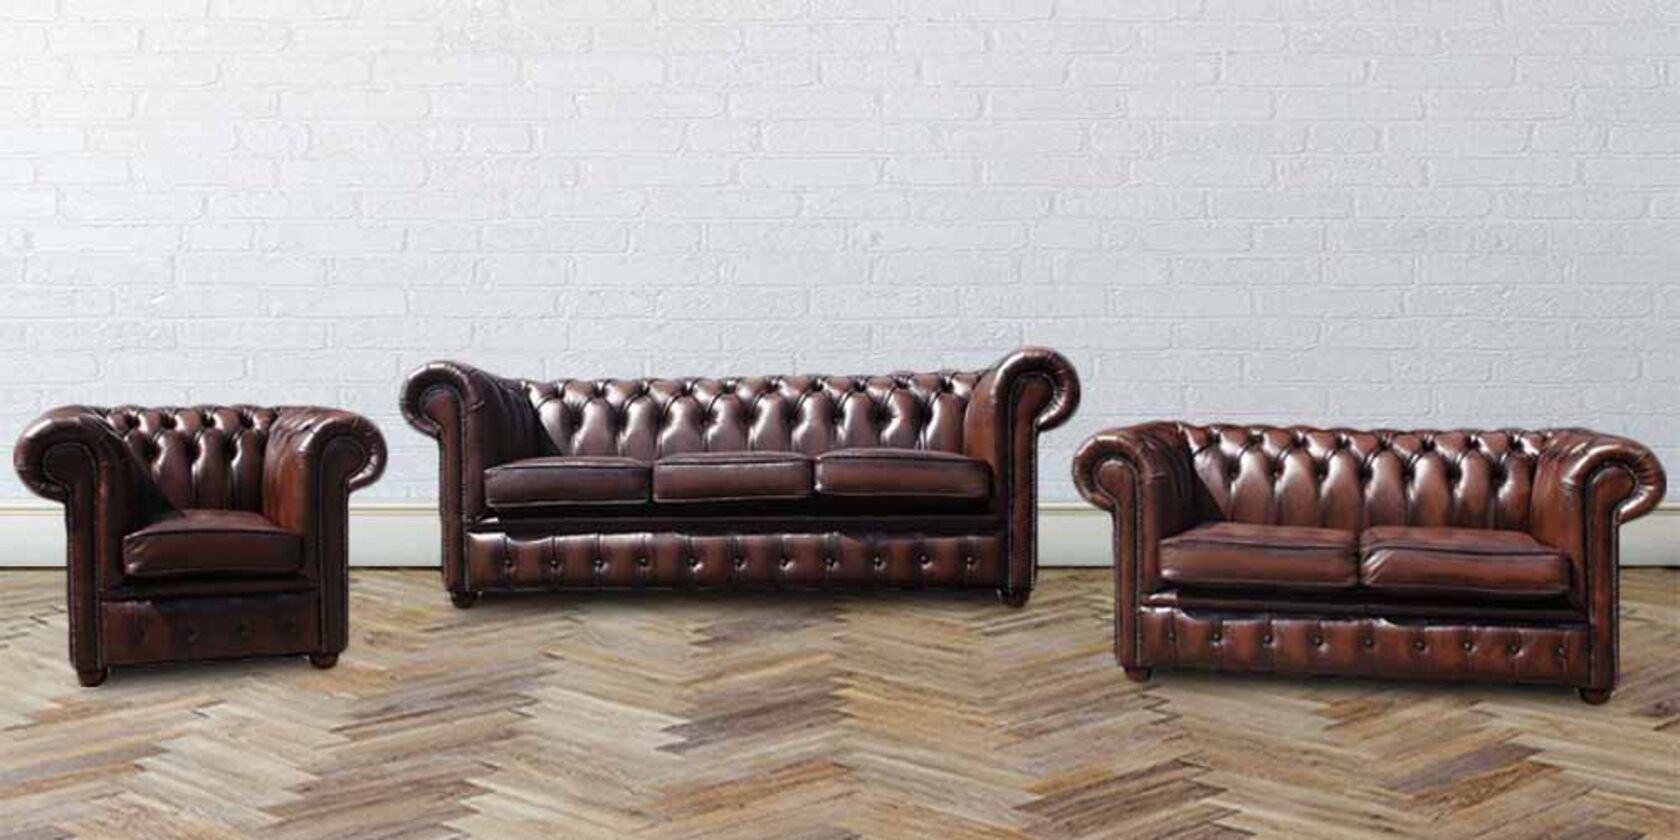 Chesterfield 3 2 1 Seater Real Antique, Leather Sofa 3 1